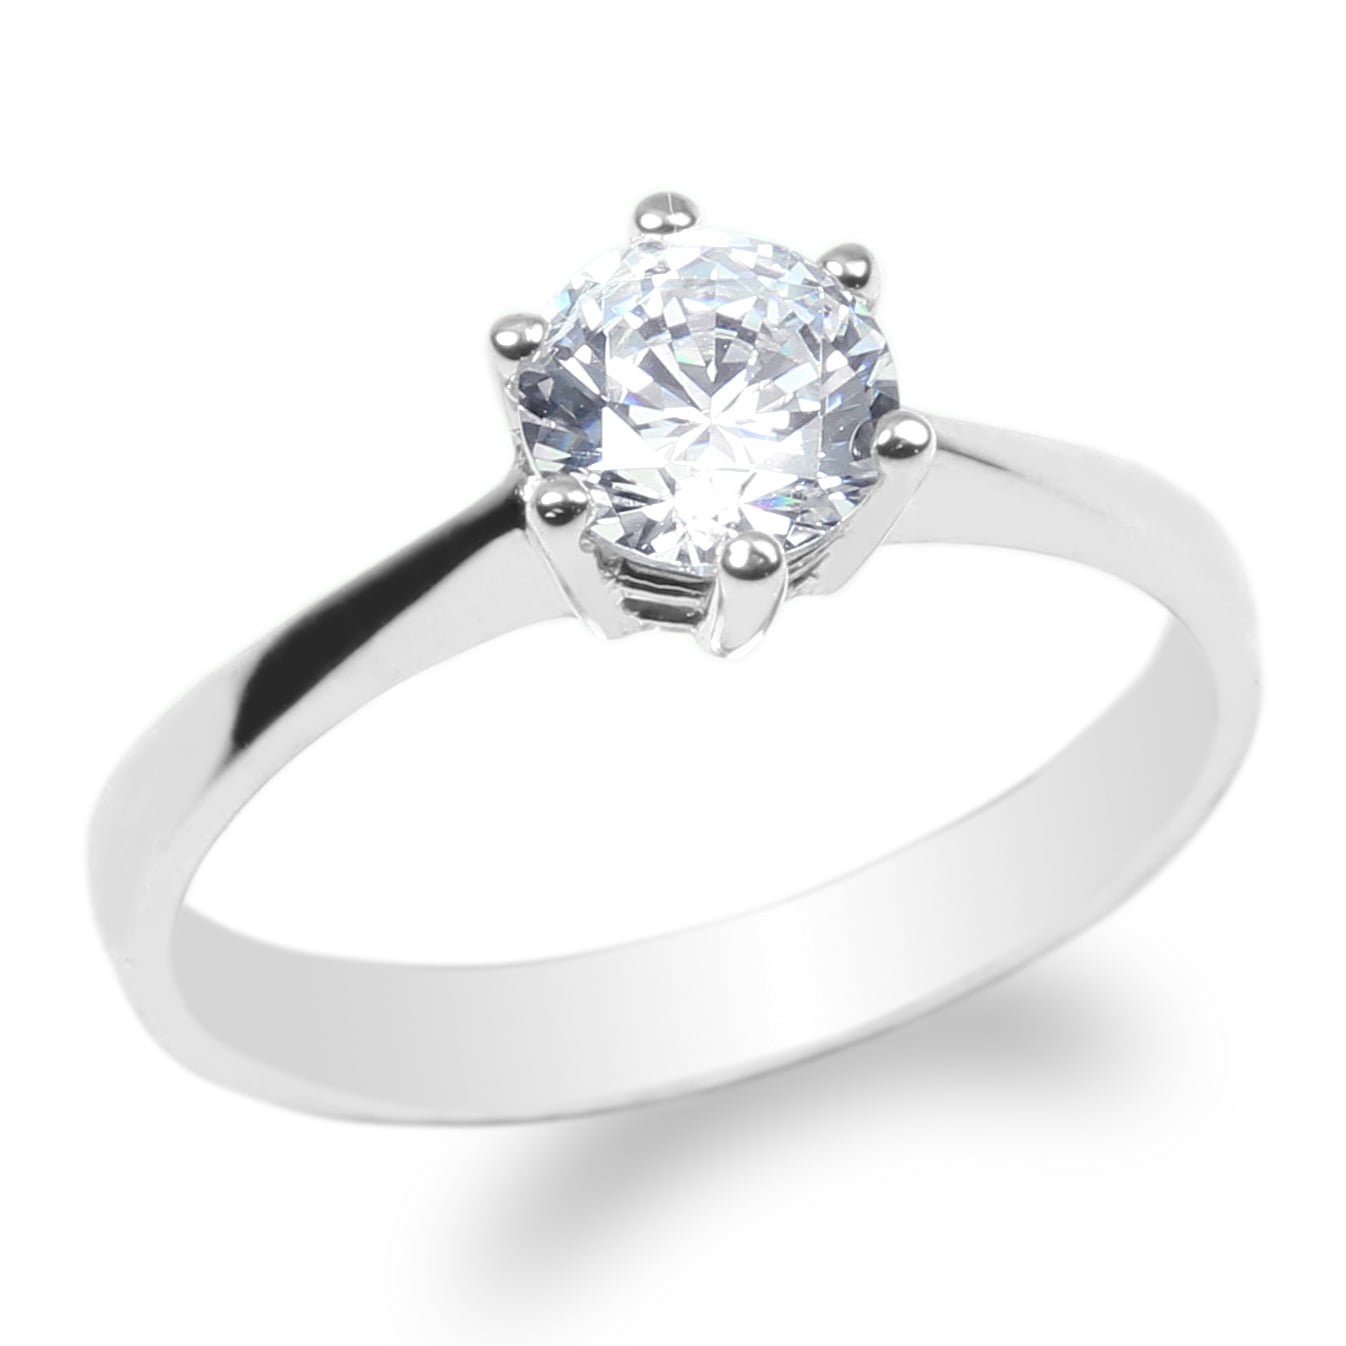 JamesJenny 14K White Gold Simple Solid 0.8ct Round CZ Solitaire Ring Size 4-10 